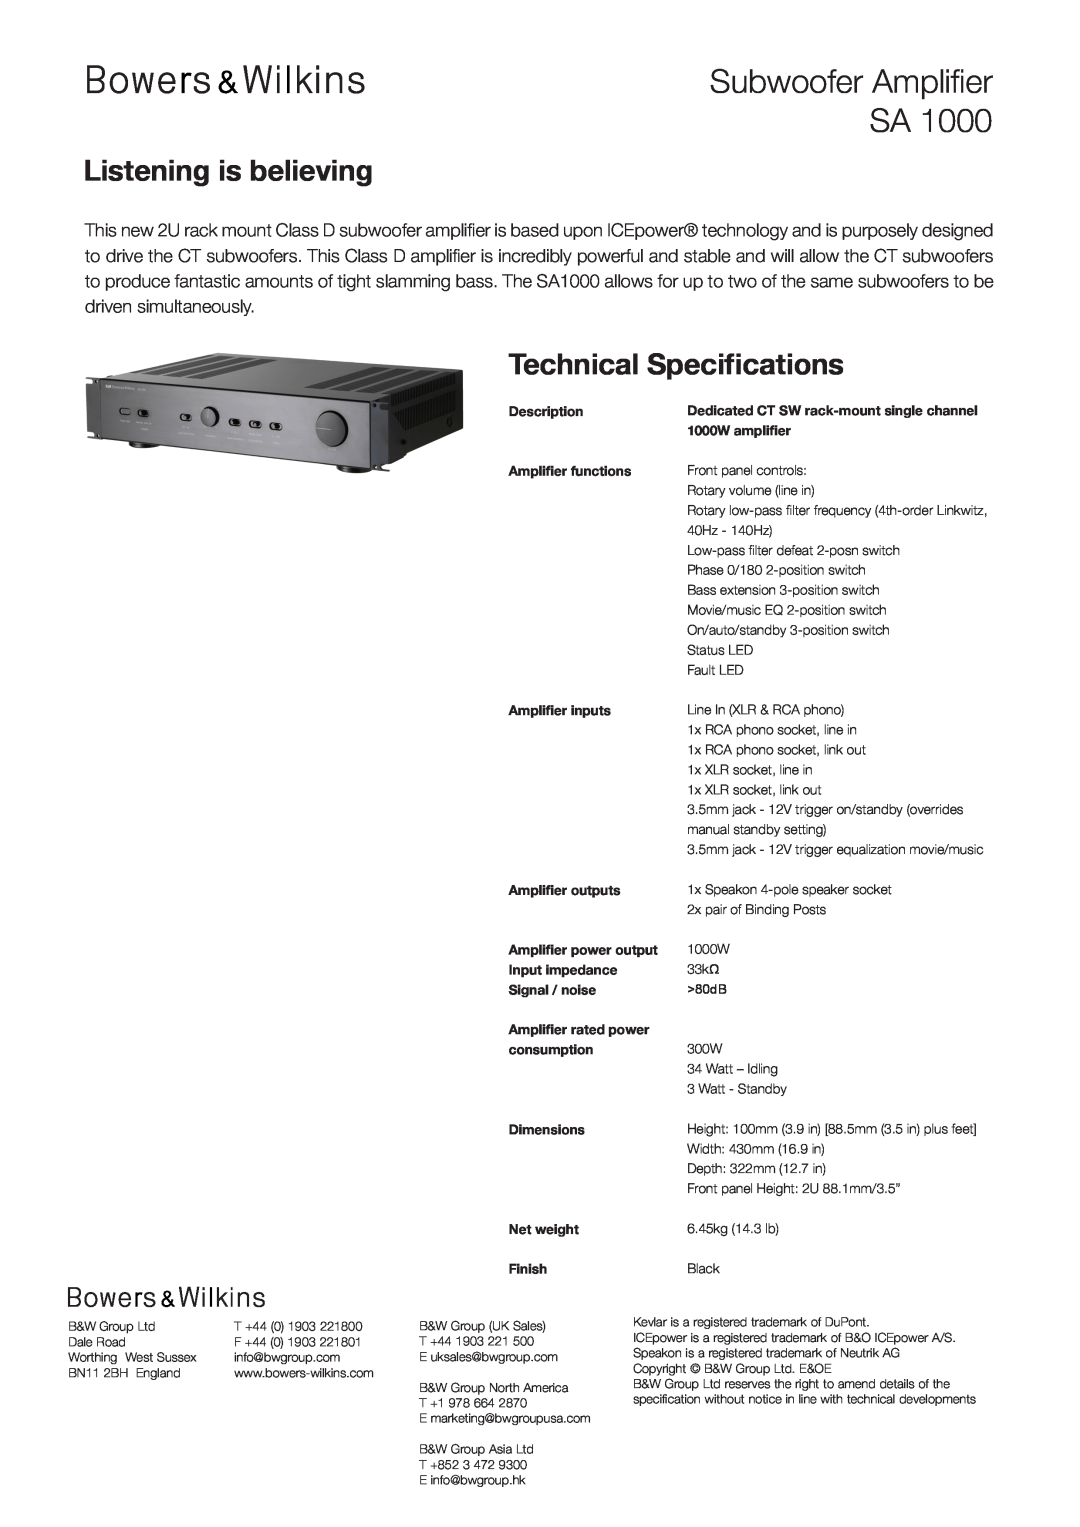 Bowers & Wilkins CT SW10 dimensions Subwoofer Amplifier SA, Listening is believing, Technical Specifications 